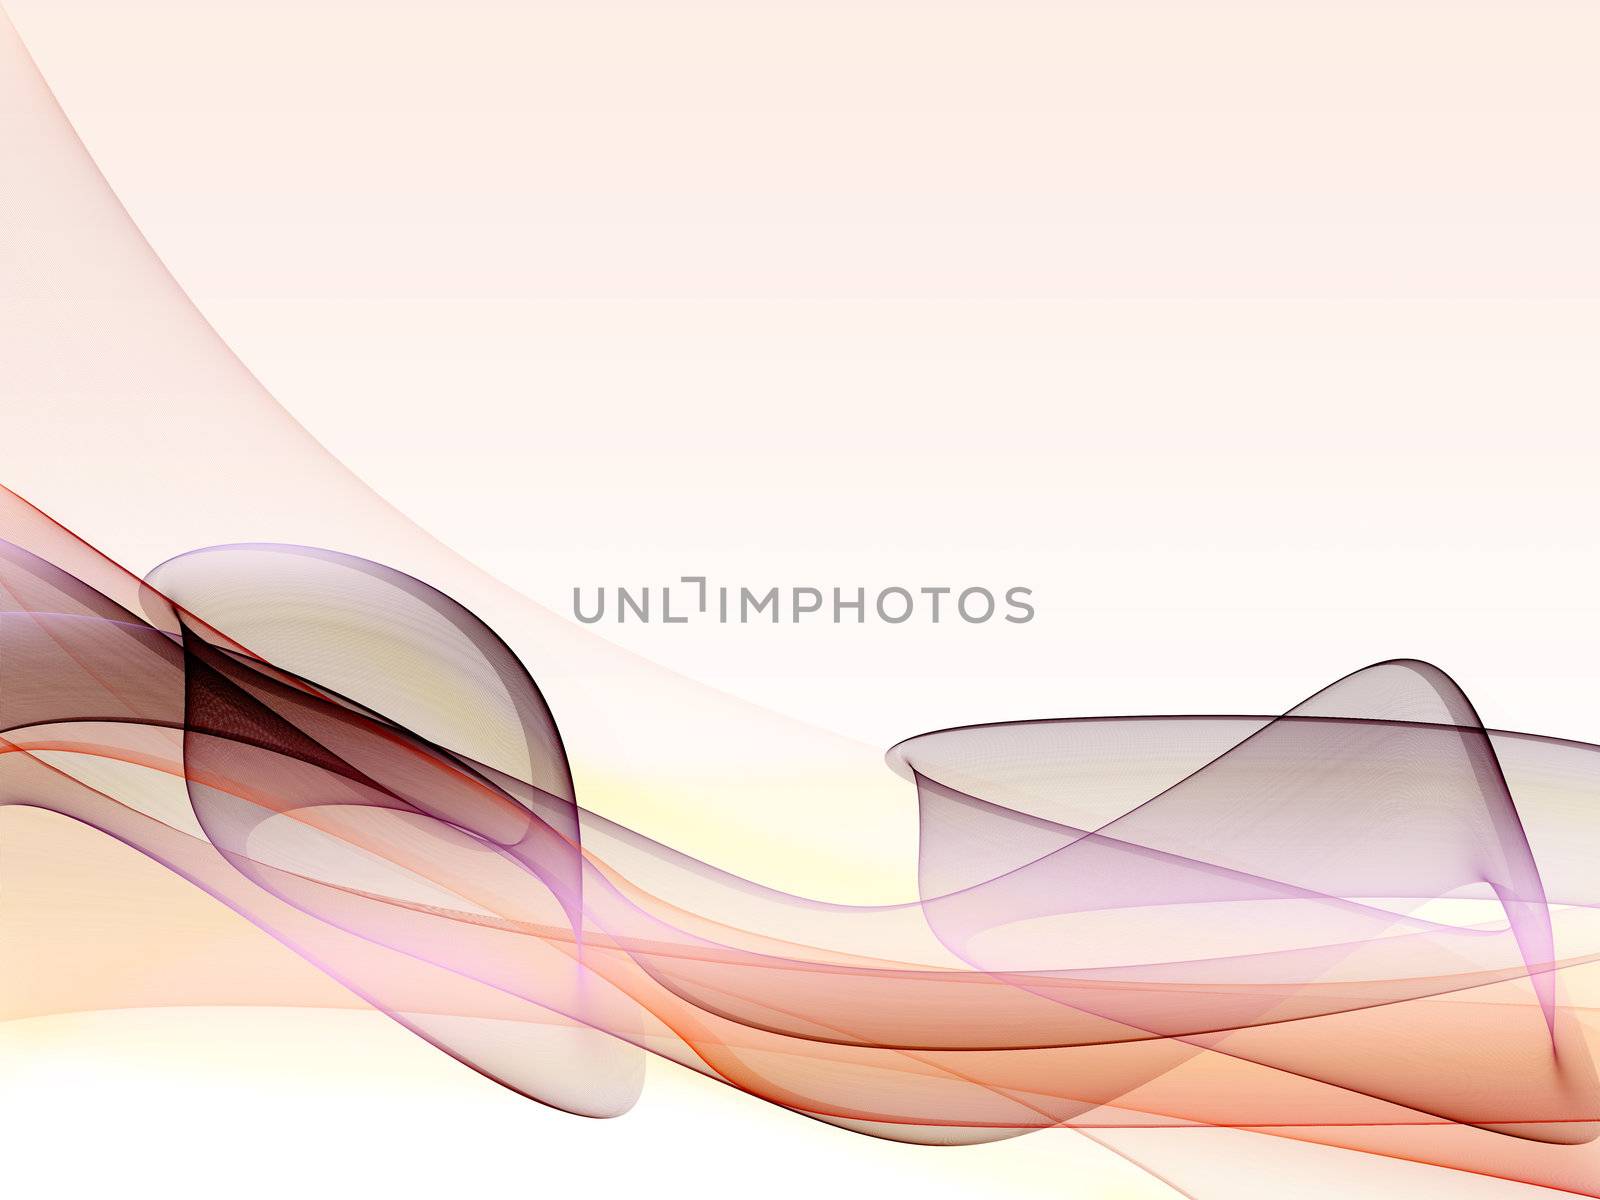 An abstract illustration of shapes in different colors on gradient background